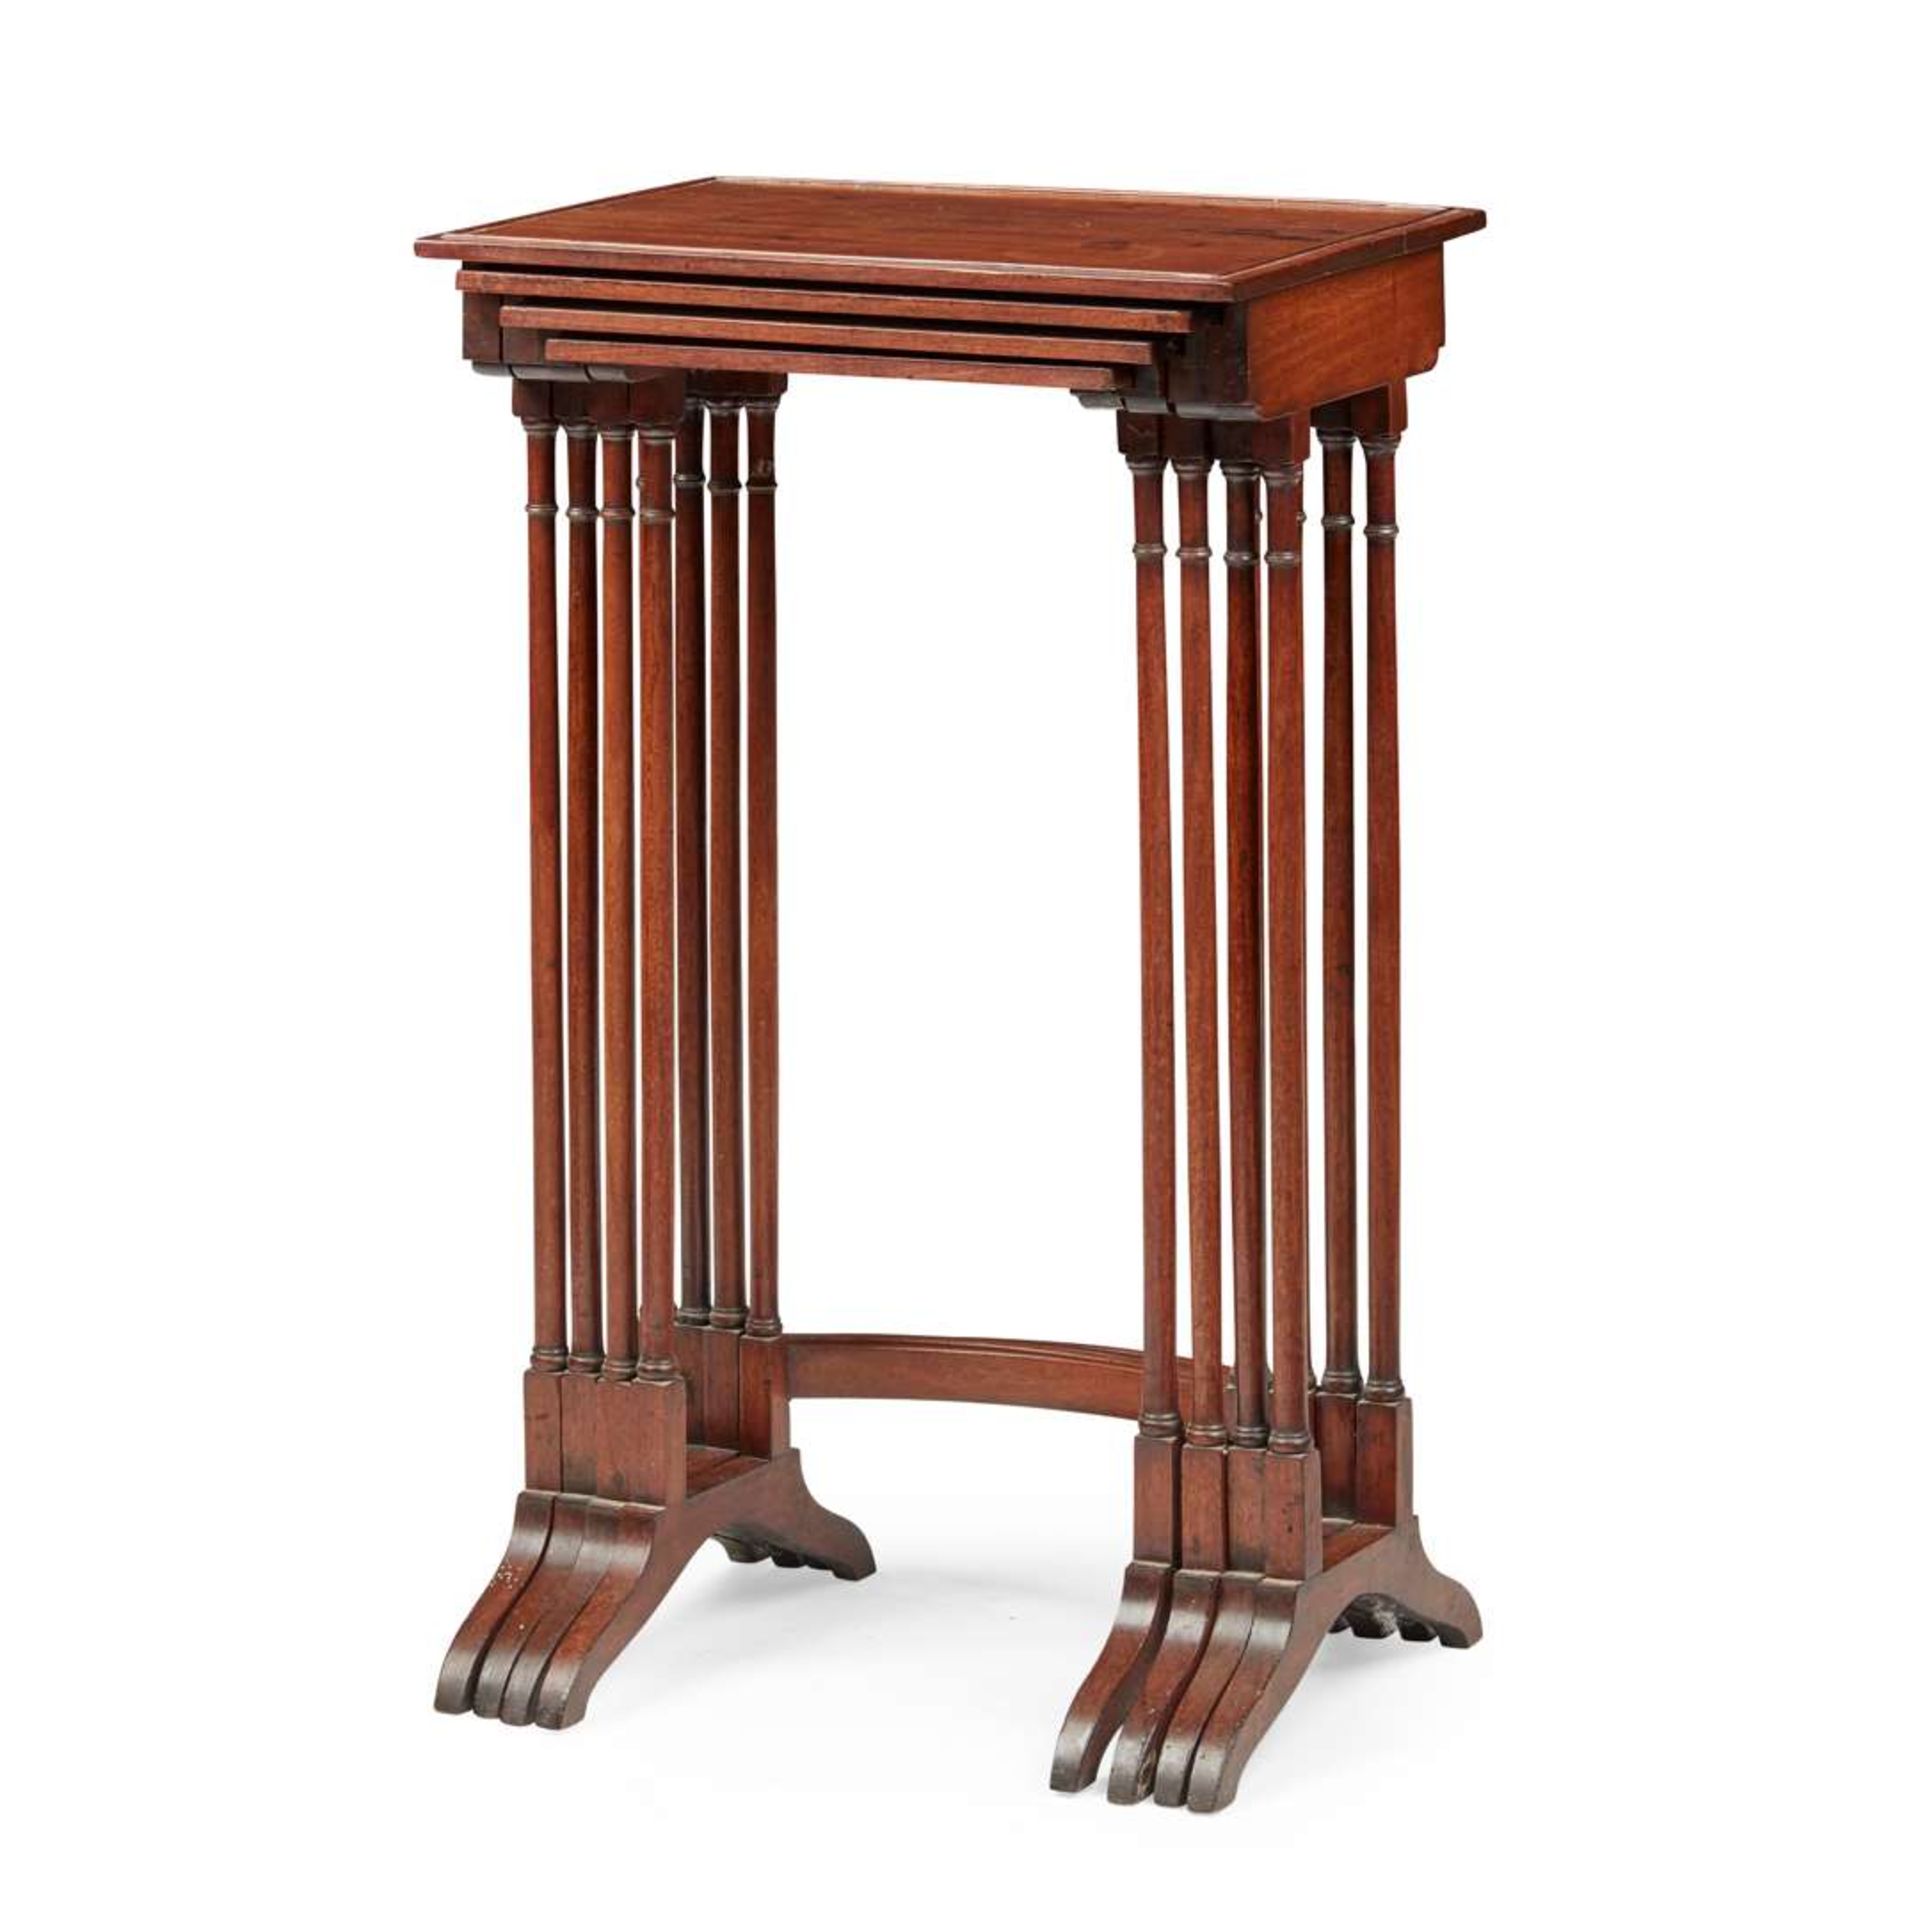 SET OF FOUR GEORGE III MAHOGANY NESTING TABLES - Image 2 of 2